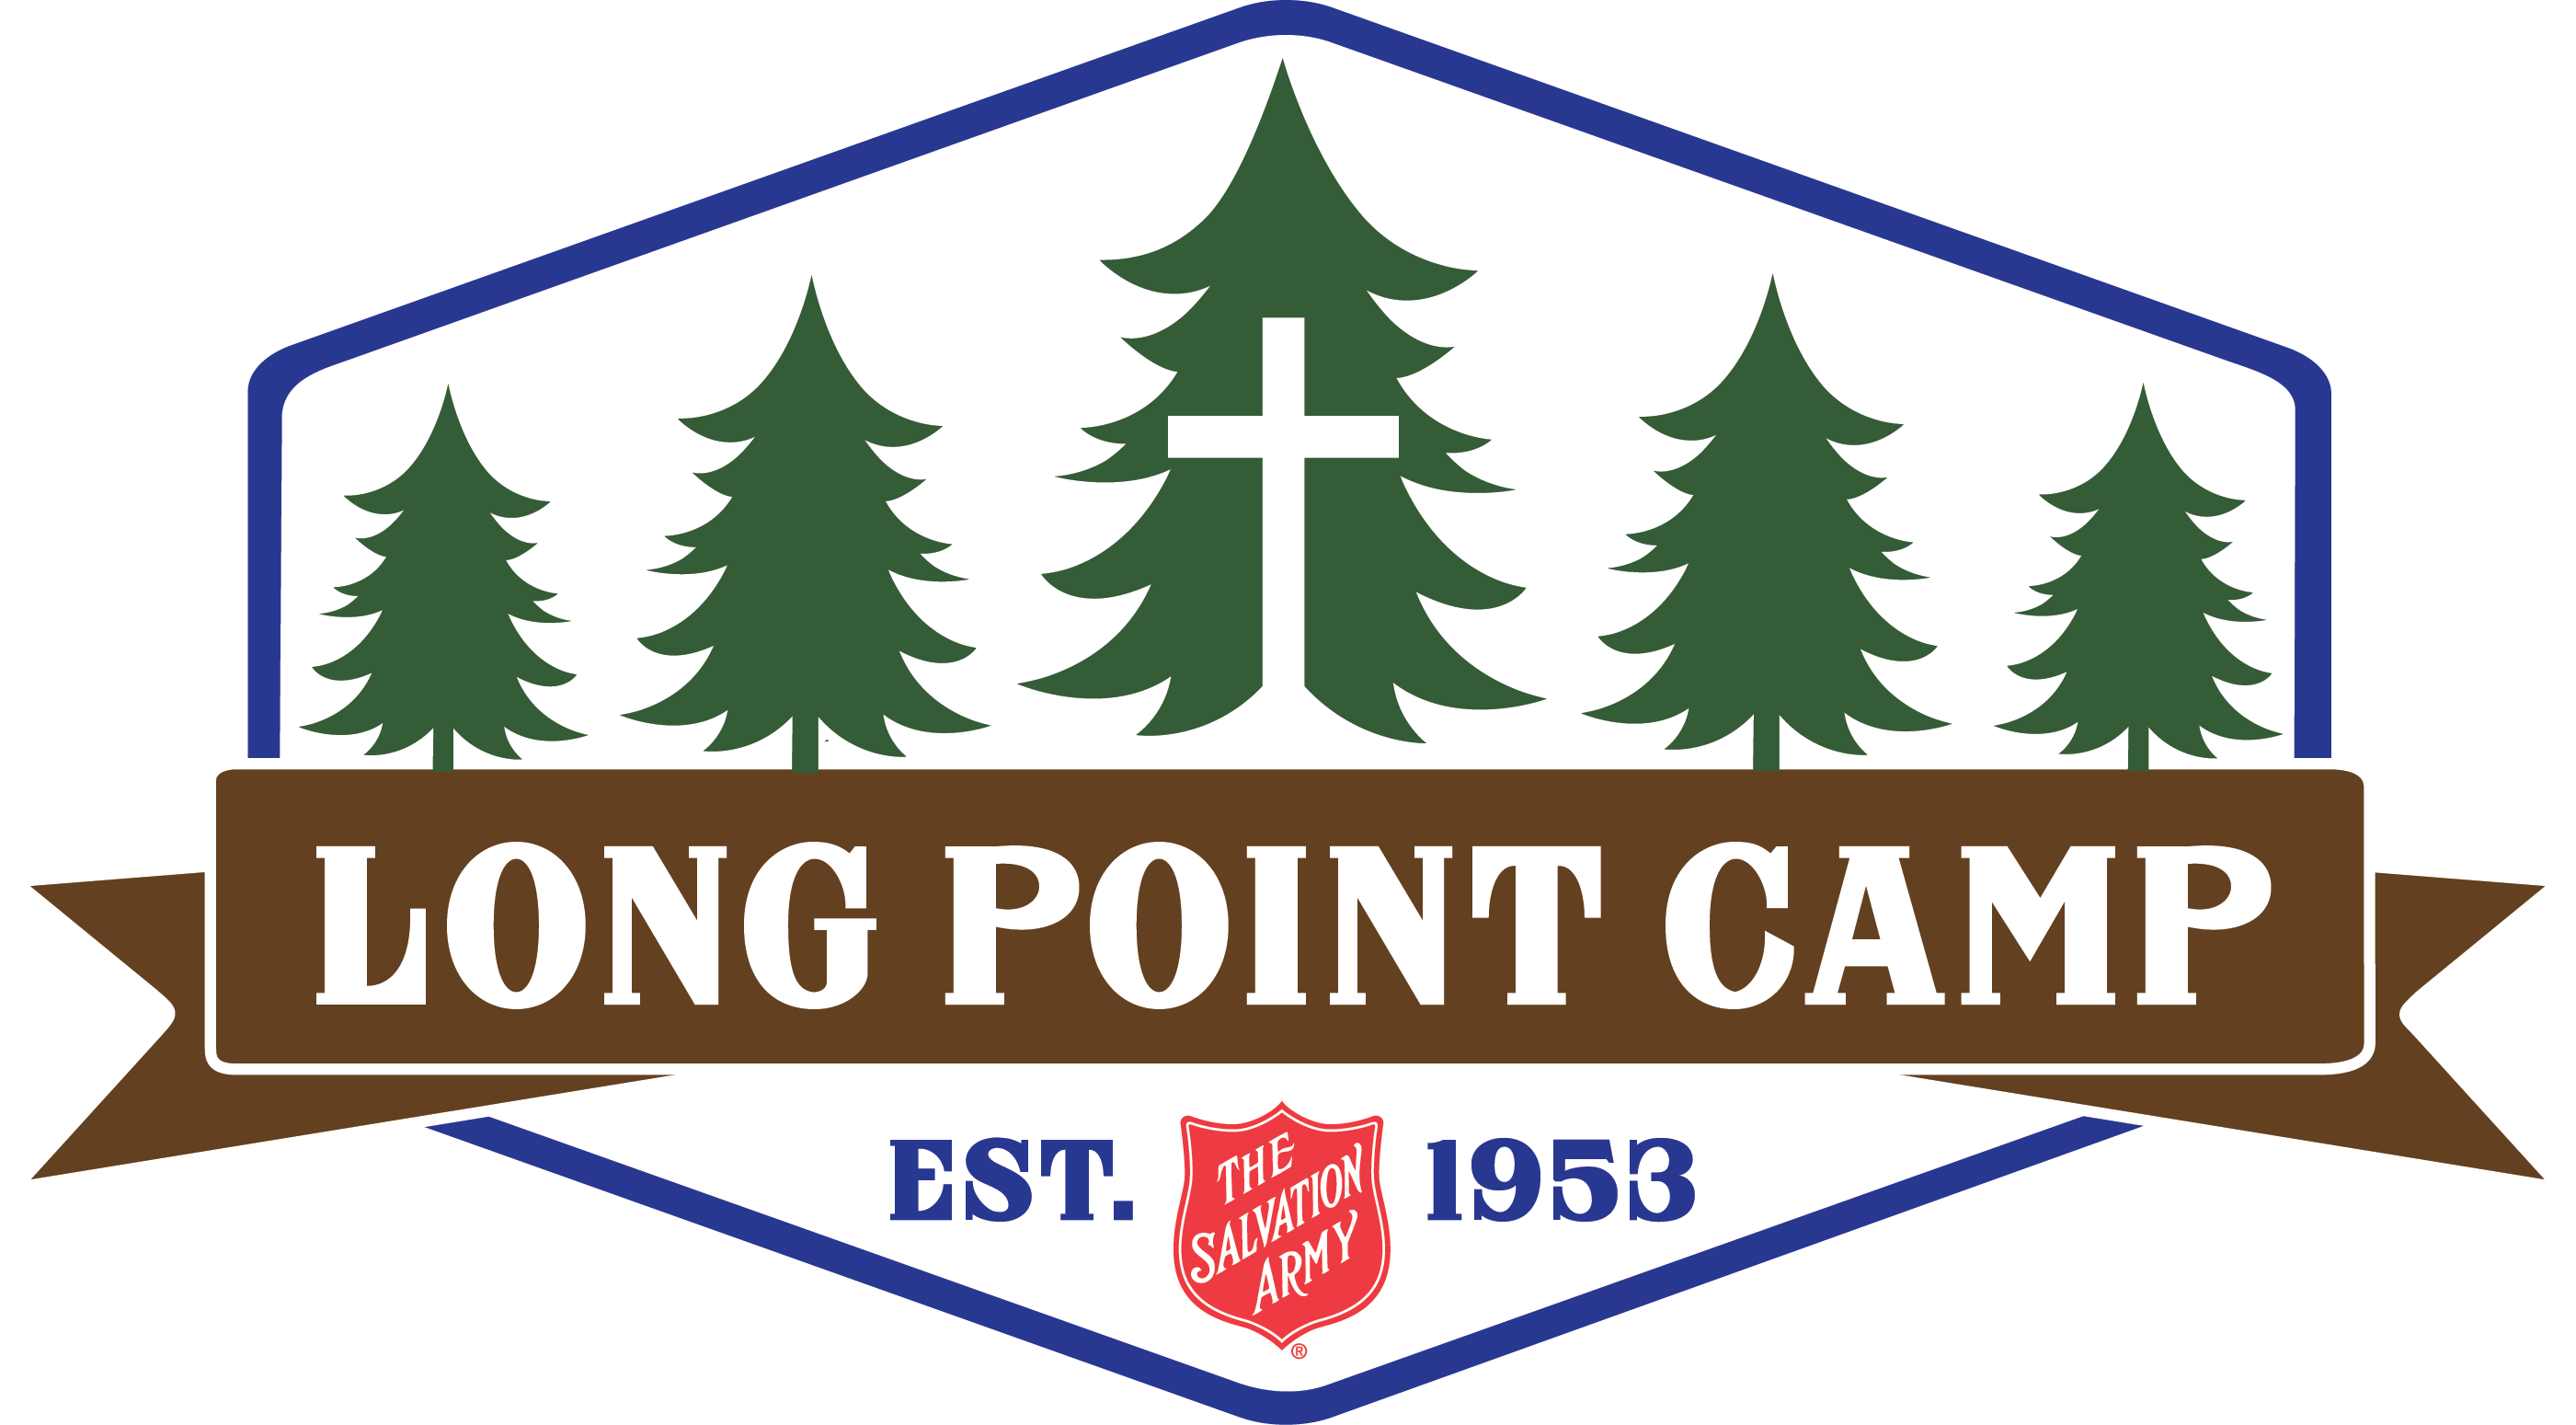 Salvation Army Logo - Home. Long Point Camp. The Salvation Army Empire State Division